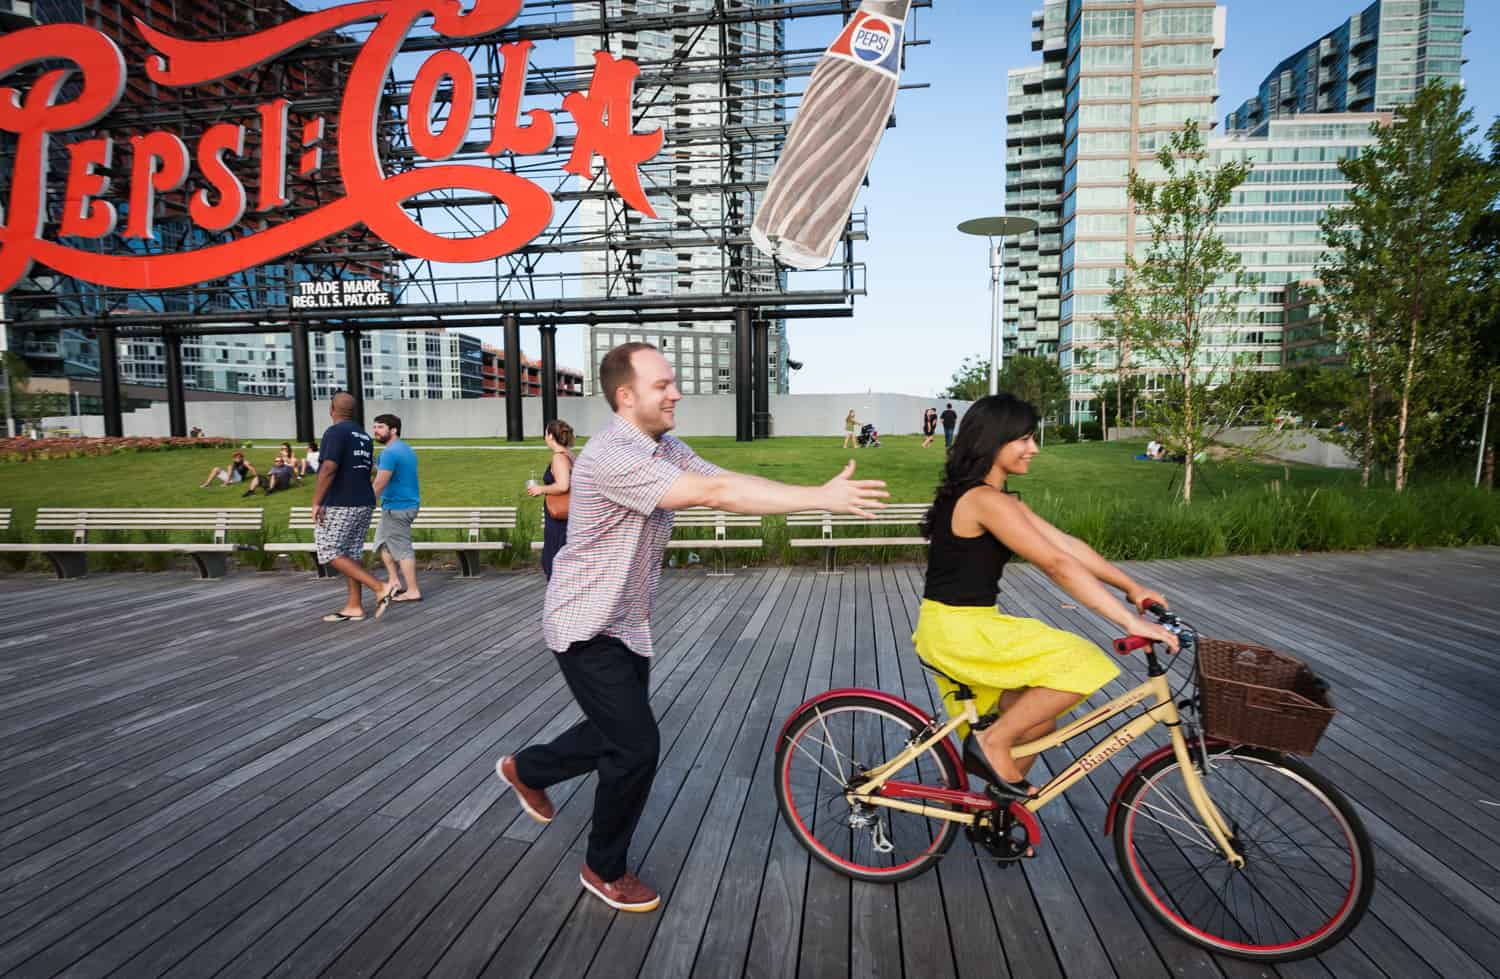 Man chasing woman on bicycle at a Gantry Plaza State Park engagement shoot